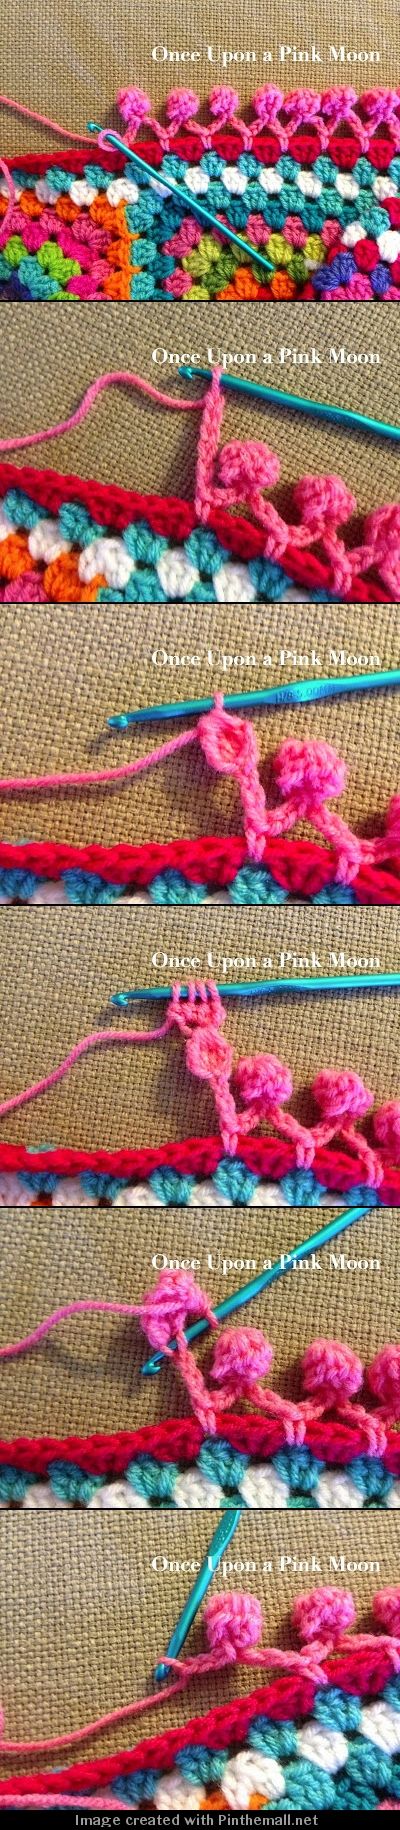 tiny crochet pompoms on a chain edge - full instructions - clever and so cute! -...